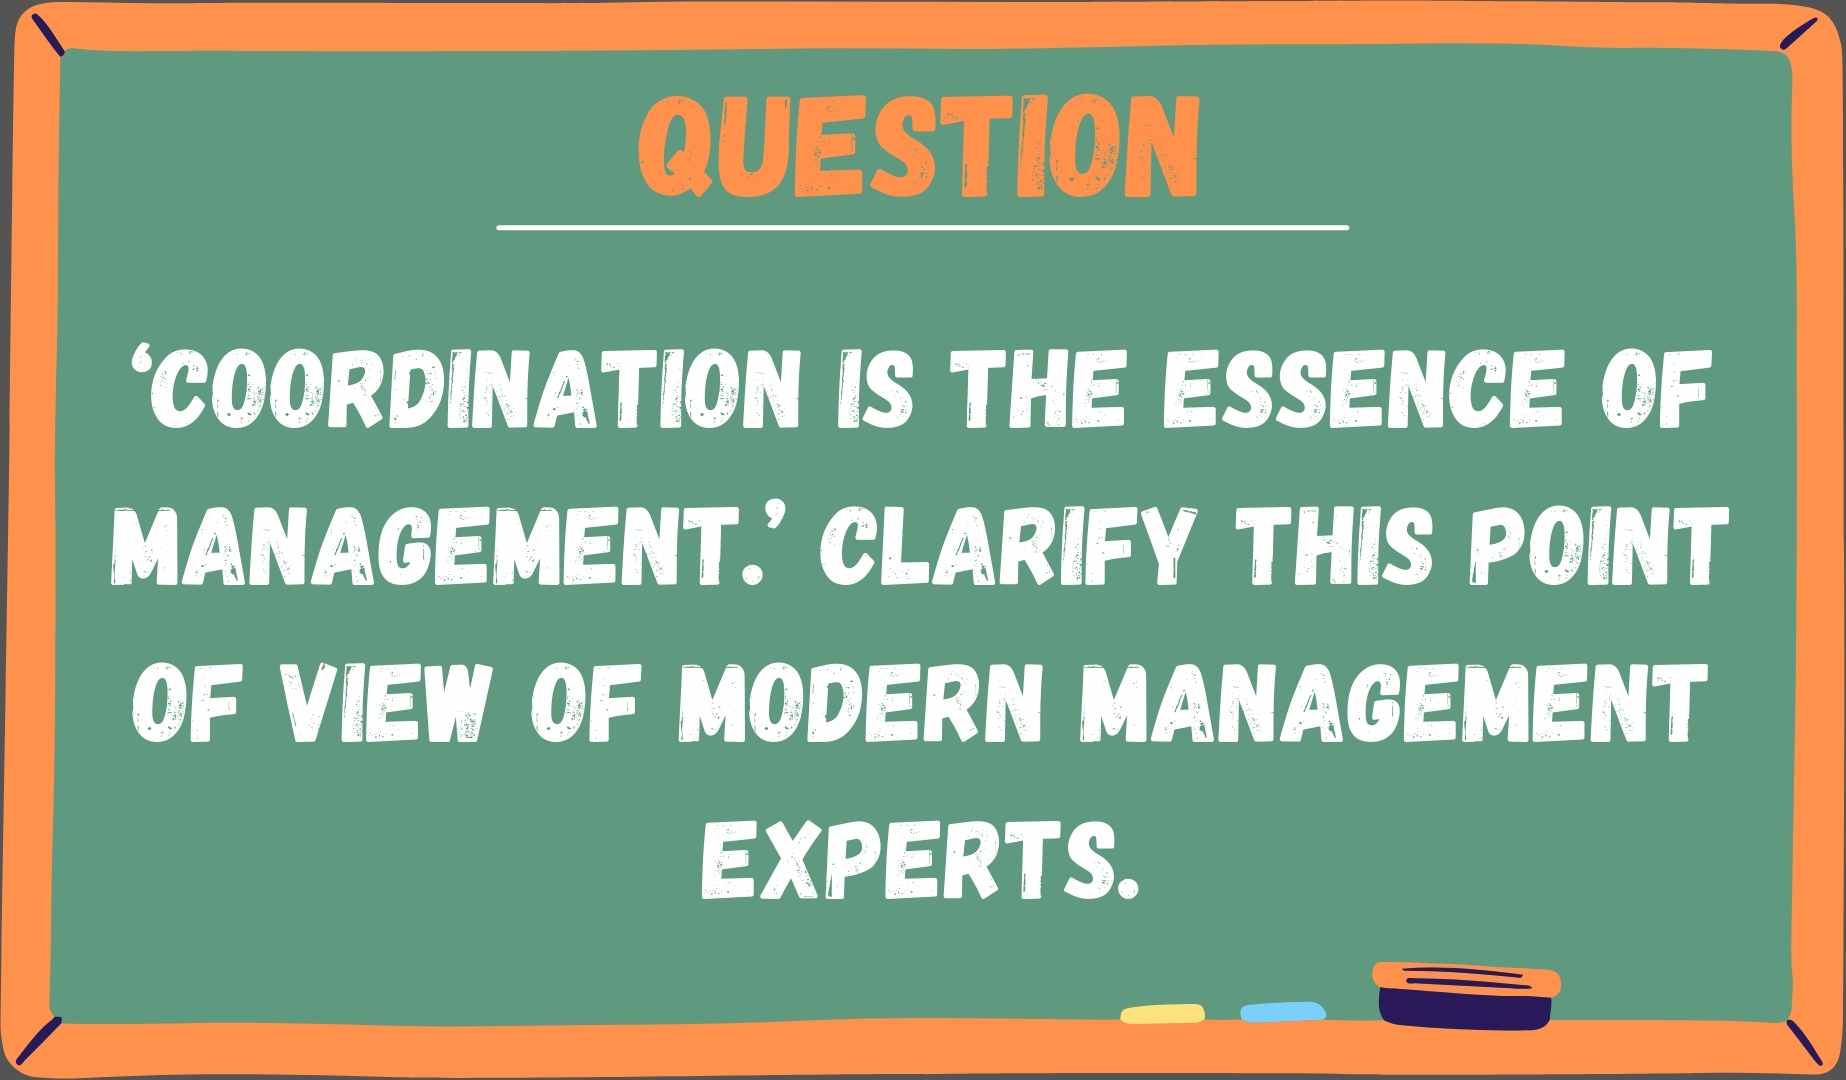 ‘Coordination is the essence of management.’ Clarify this point of view of modern management experts.